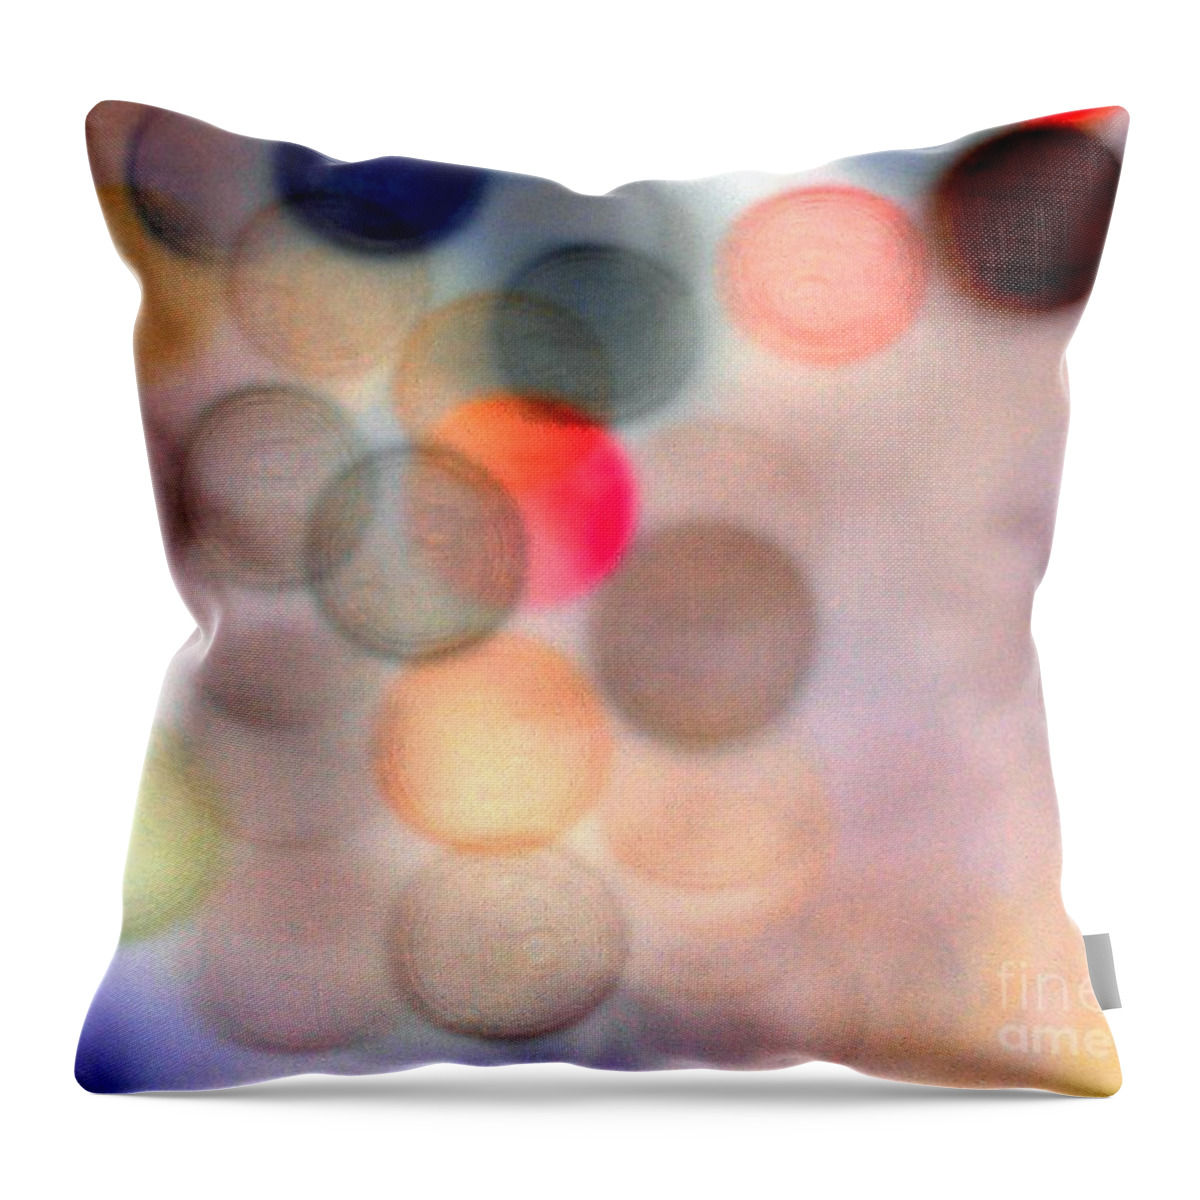 Light Throw Pillow featuring the photograph She Lights Up The Room by Jacqueline McReynolds